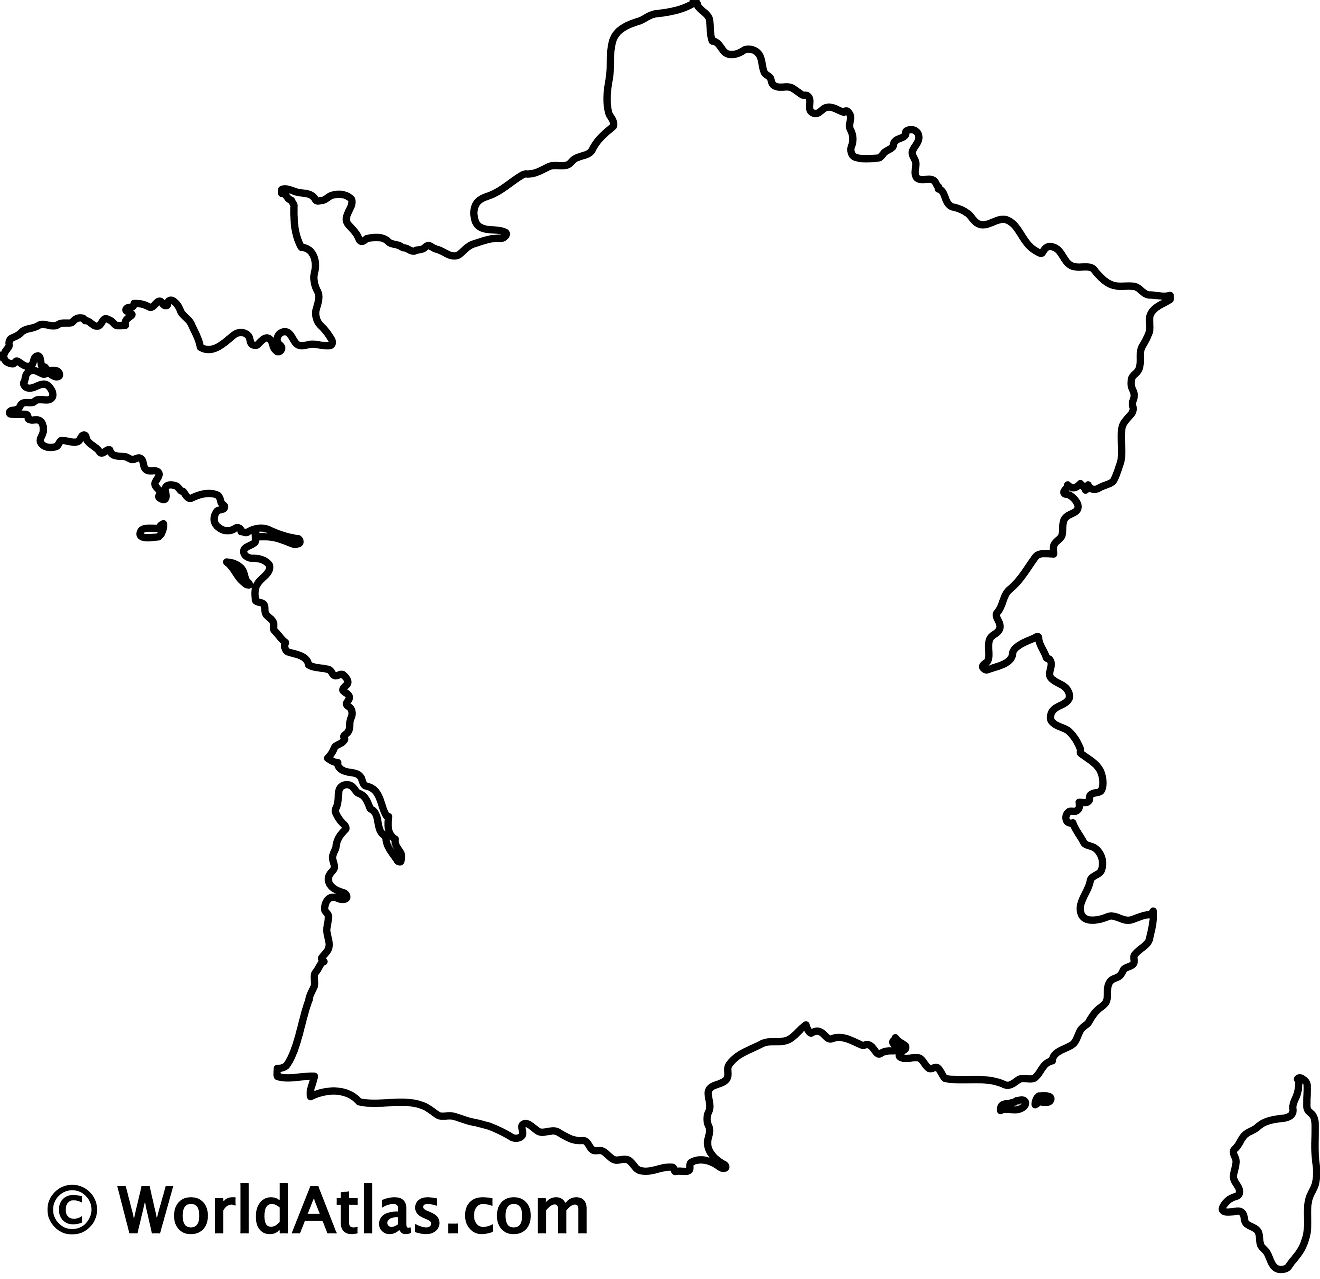 What is the Capital of France? - WorldAtlas